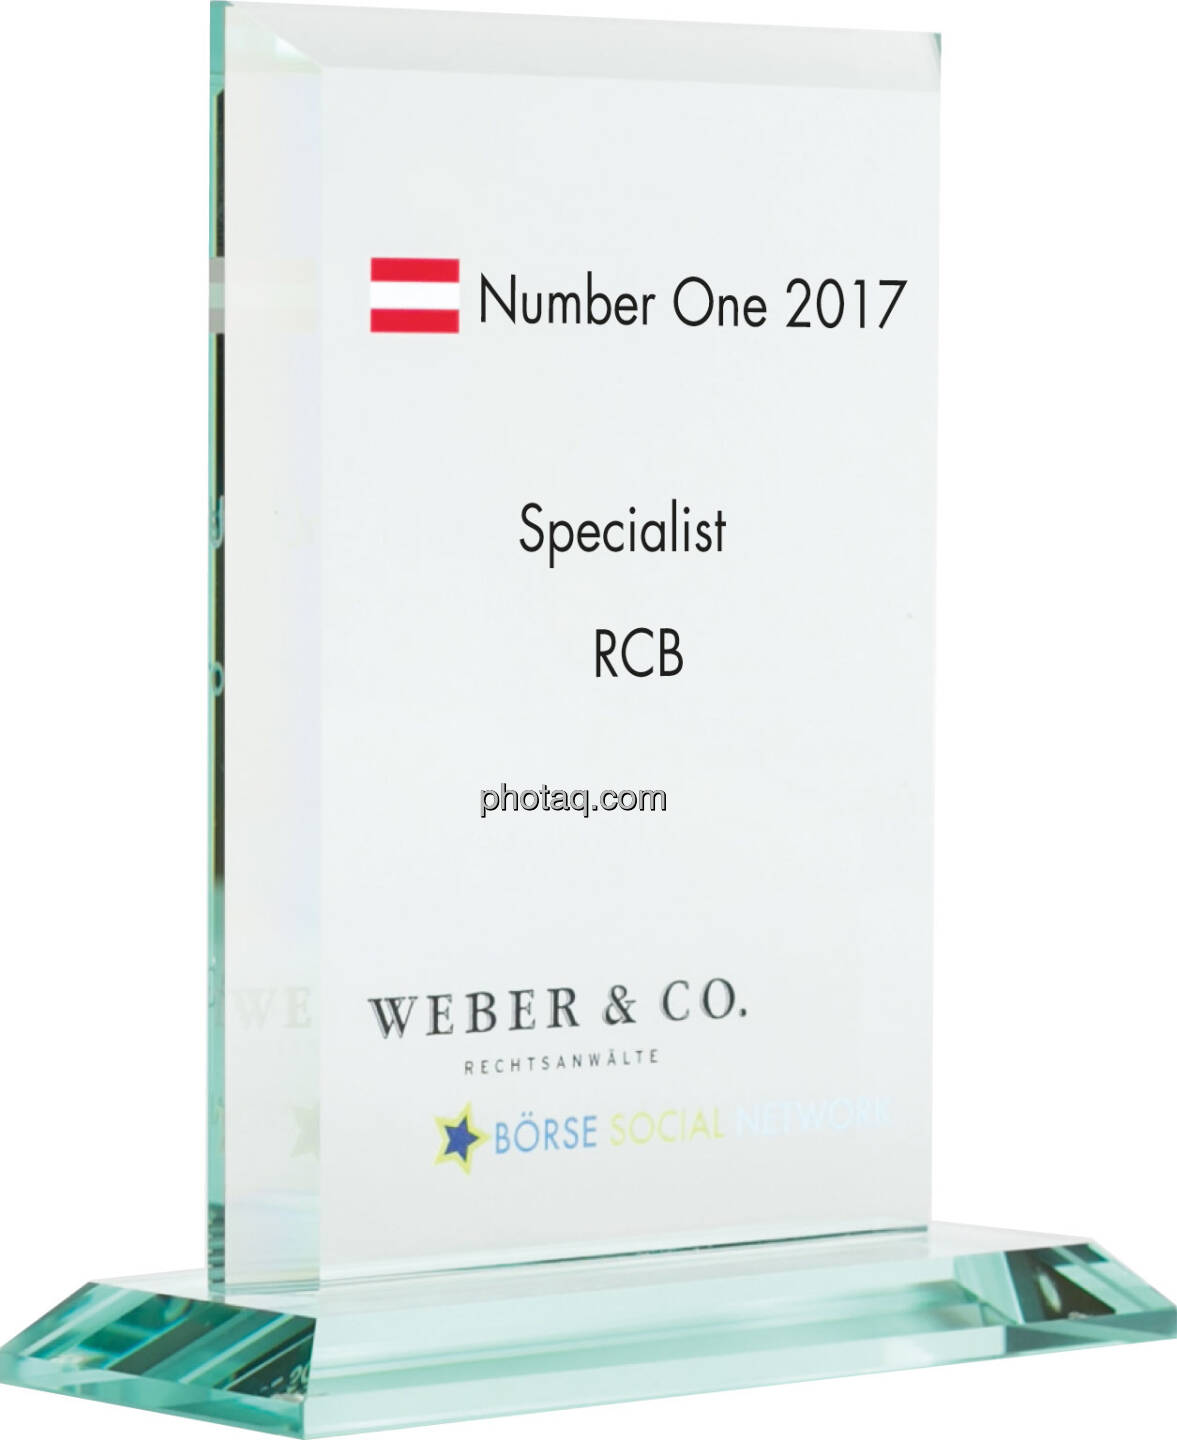 Number One Awards 2017 - Specialist - RCB